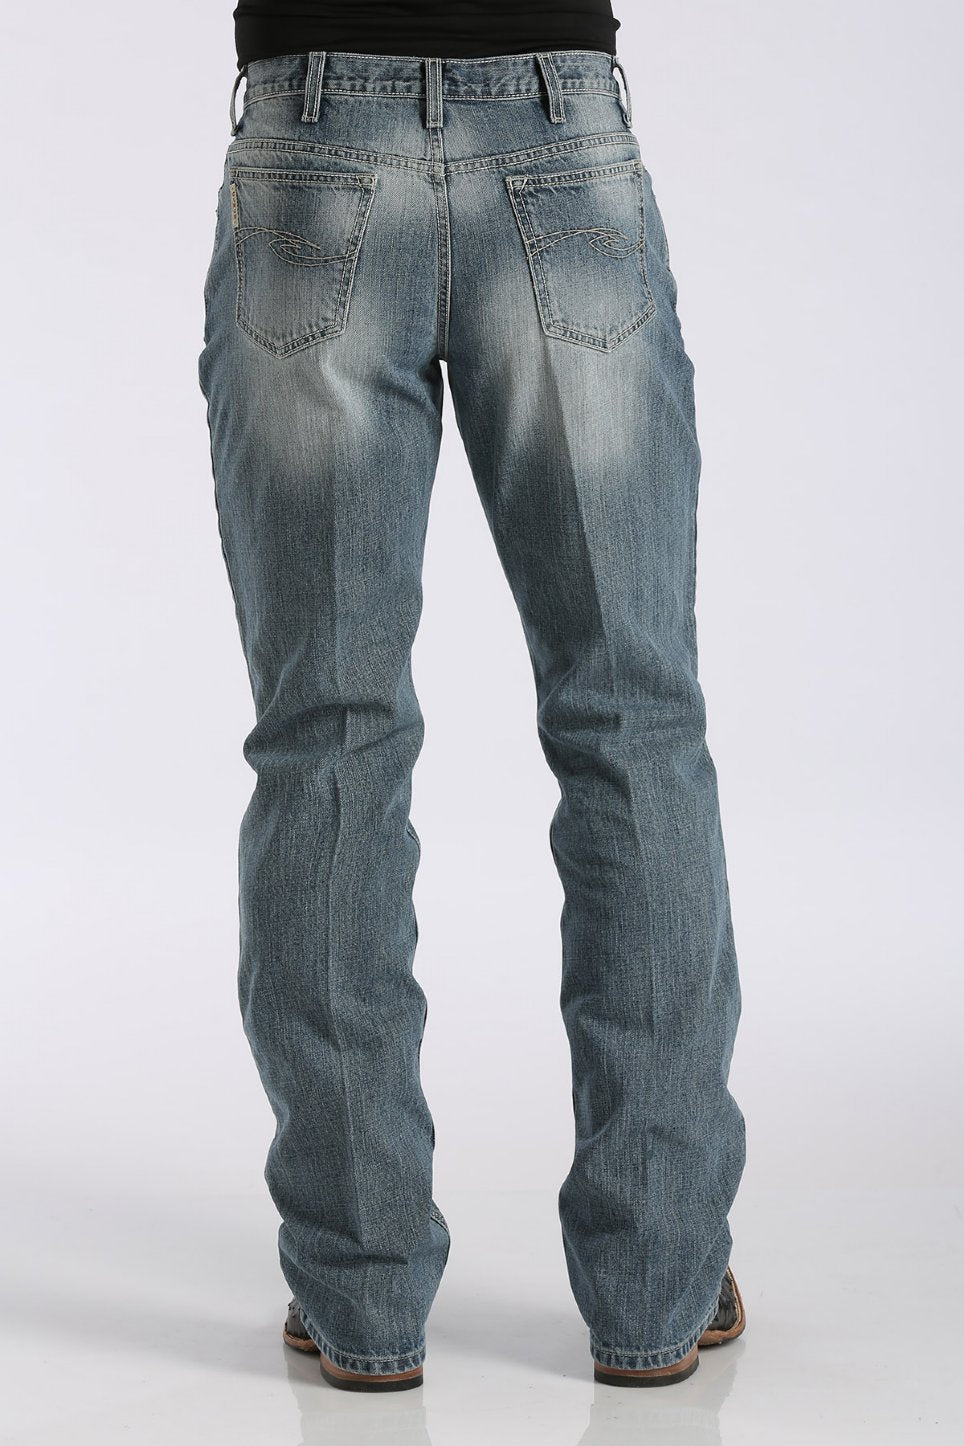 Men's Cinch Relaxed Fit Dooley Jeans